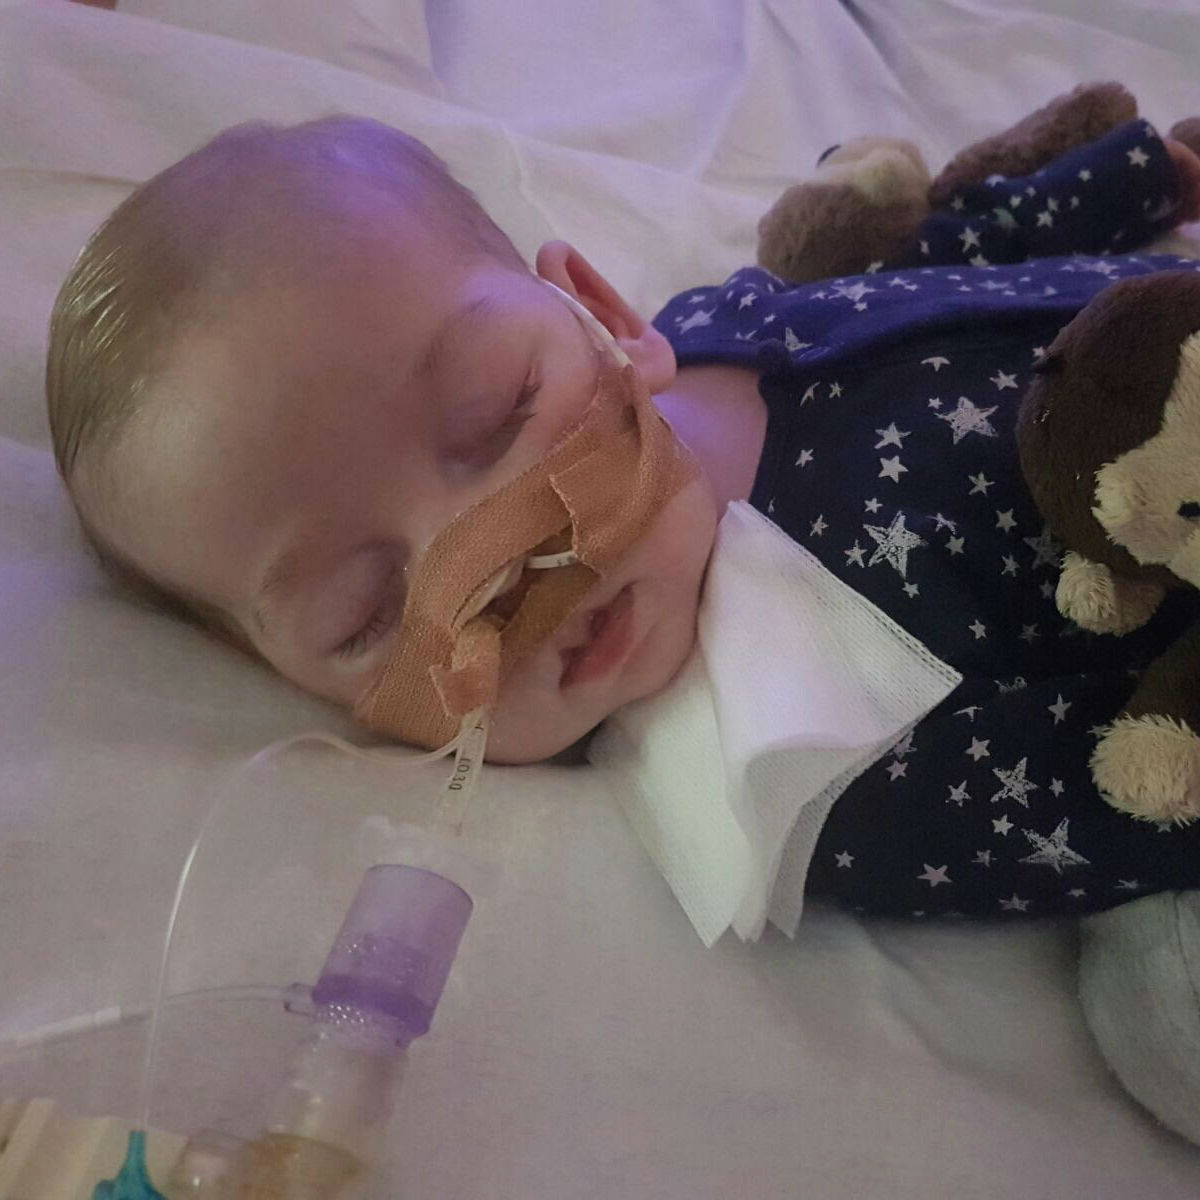 Hospital applies for fresh court hearing for Charlie Gard following claims of new evidence 